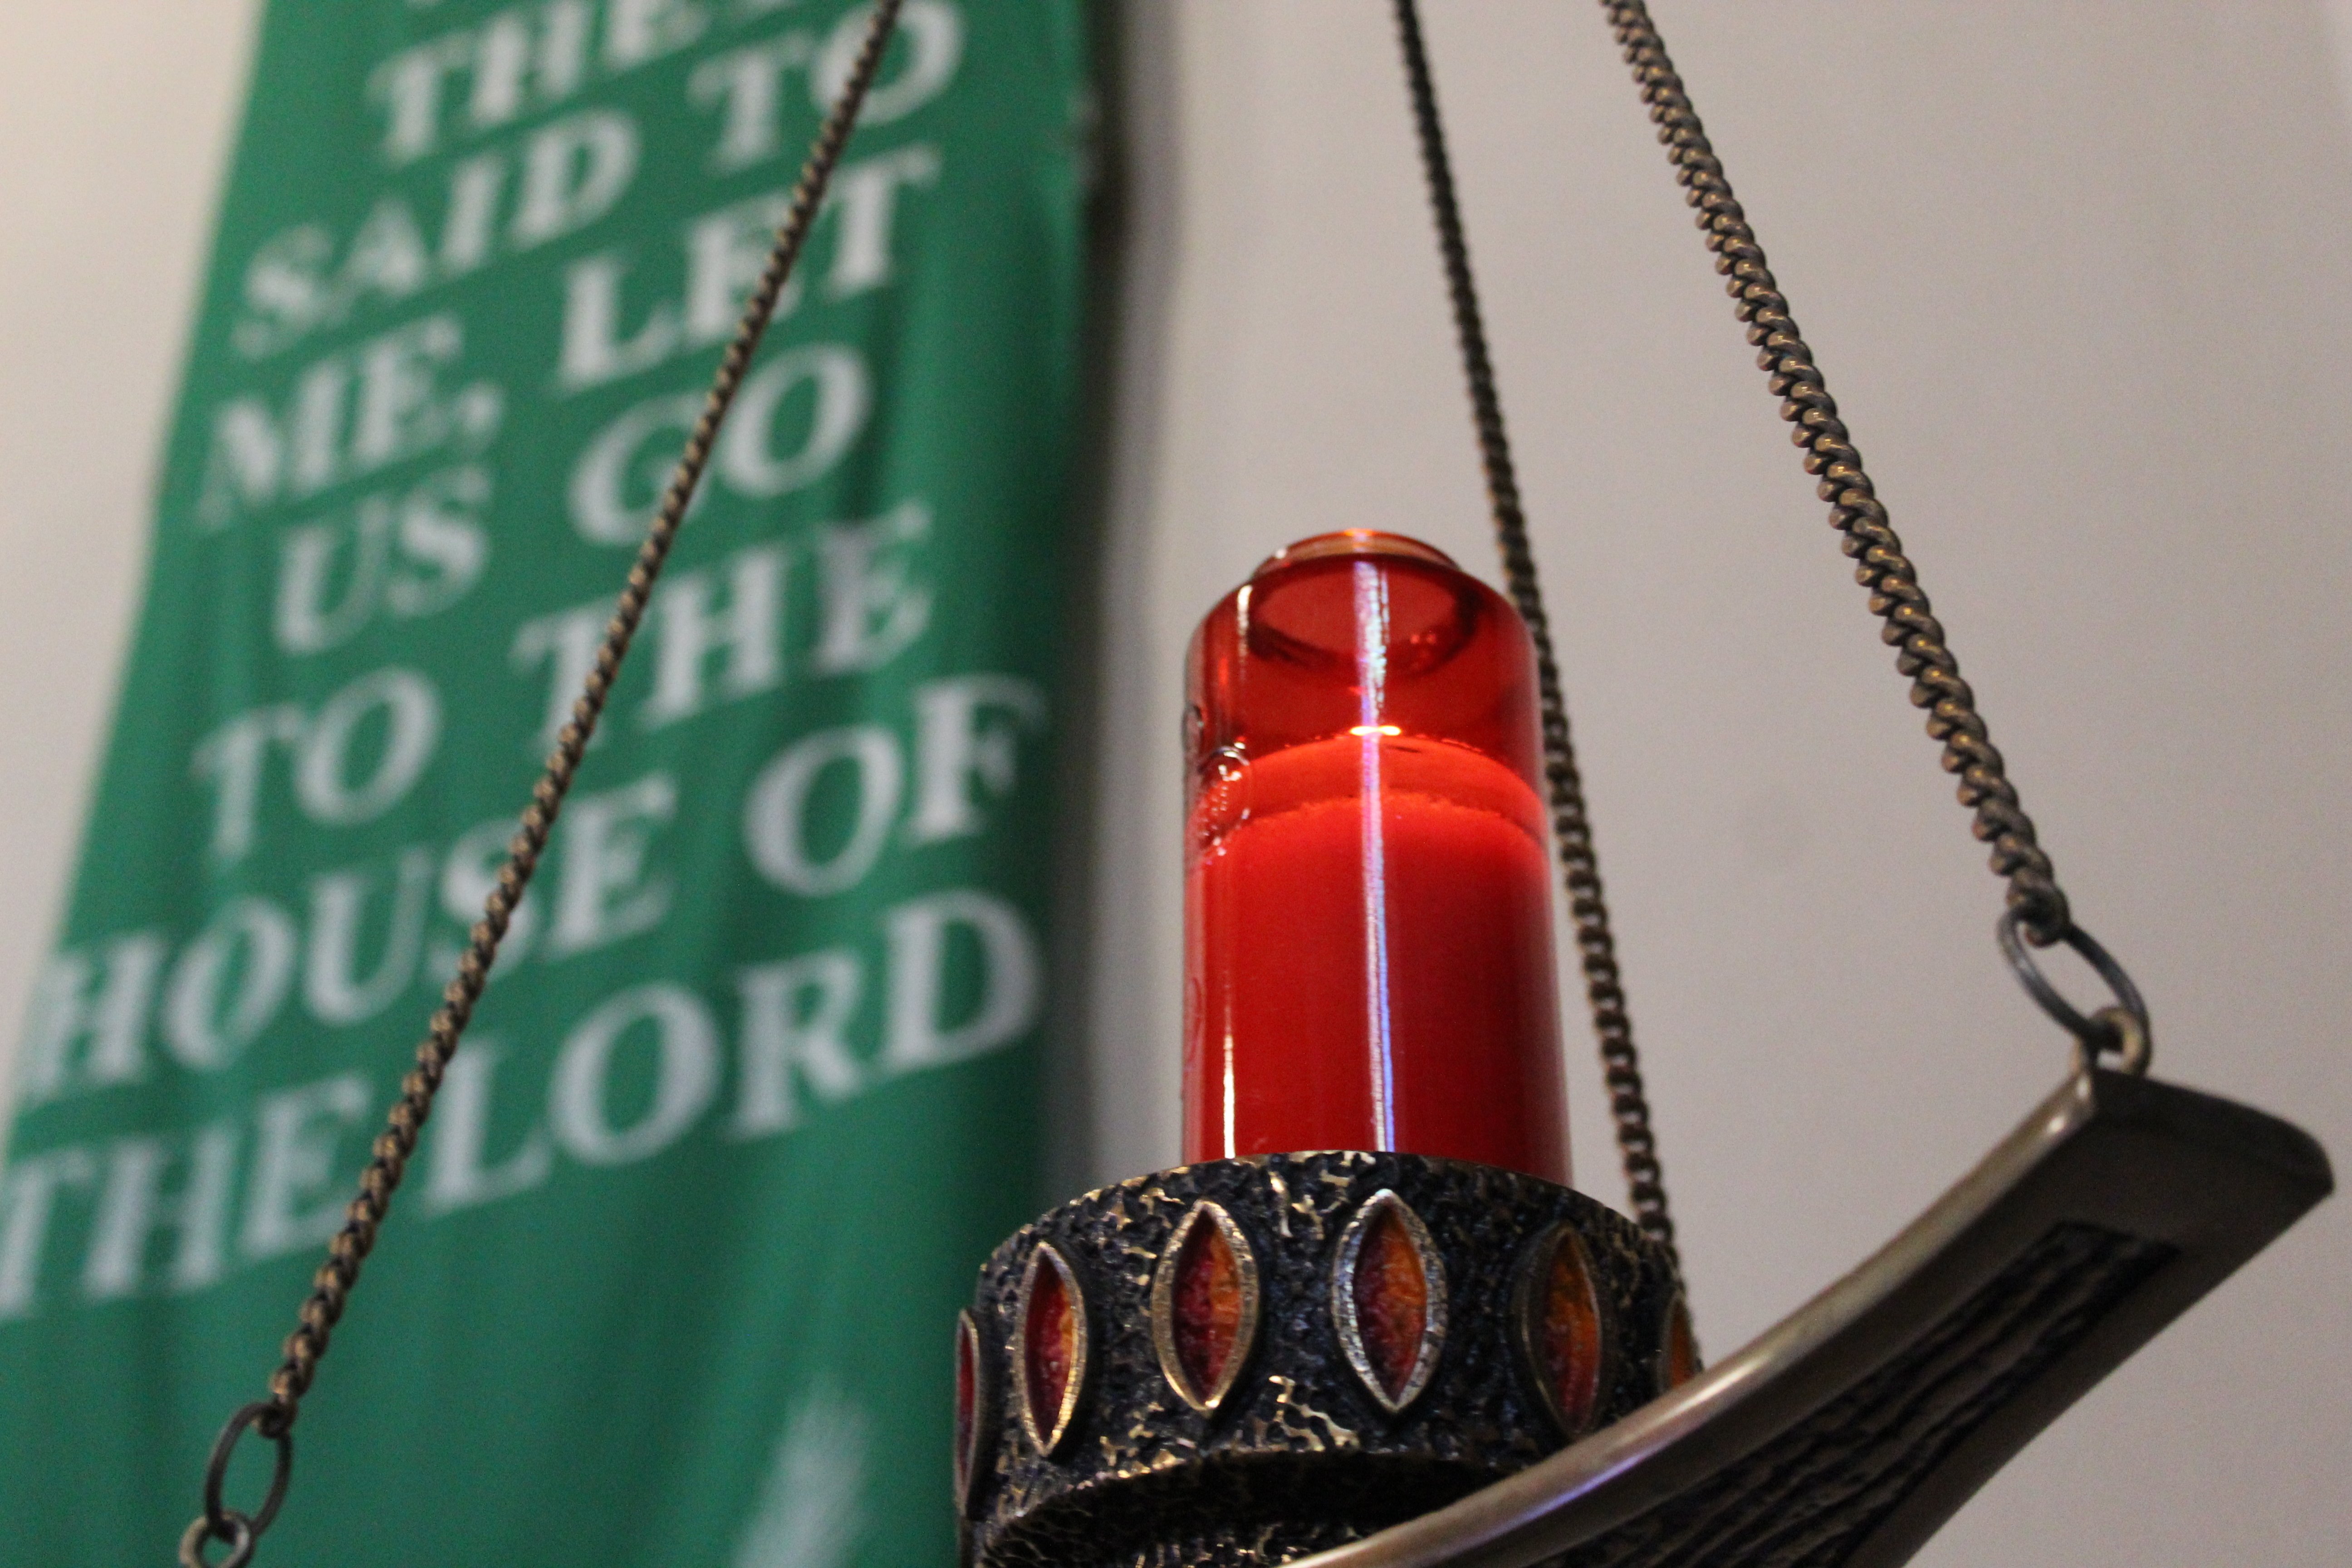 Tabernacle Red Candle lite with a green banner in the background.